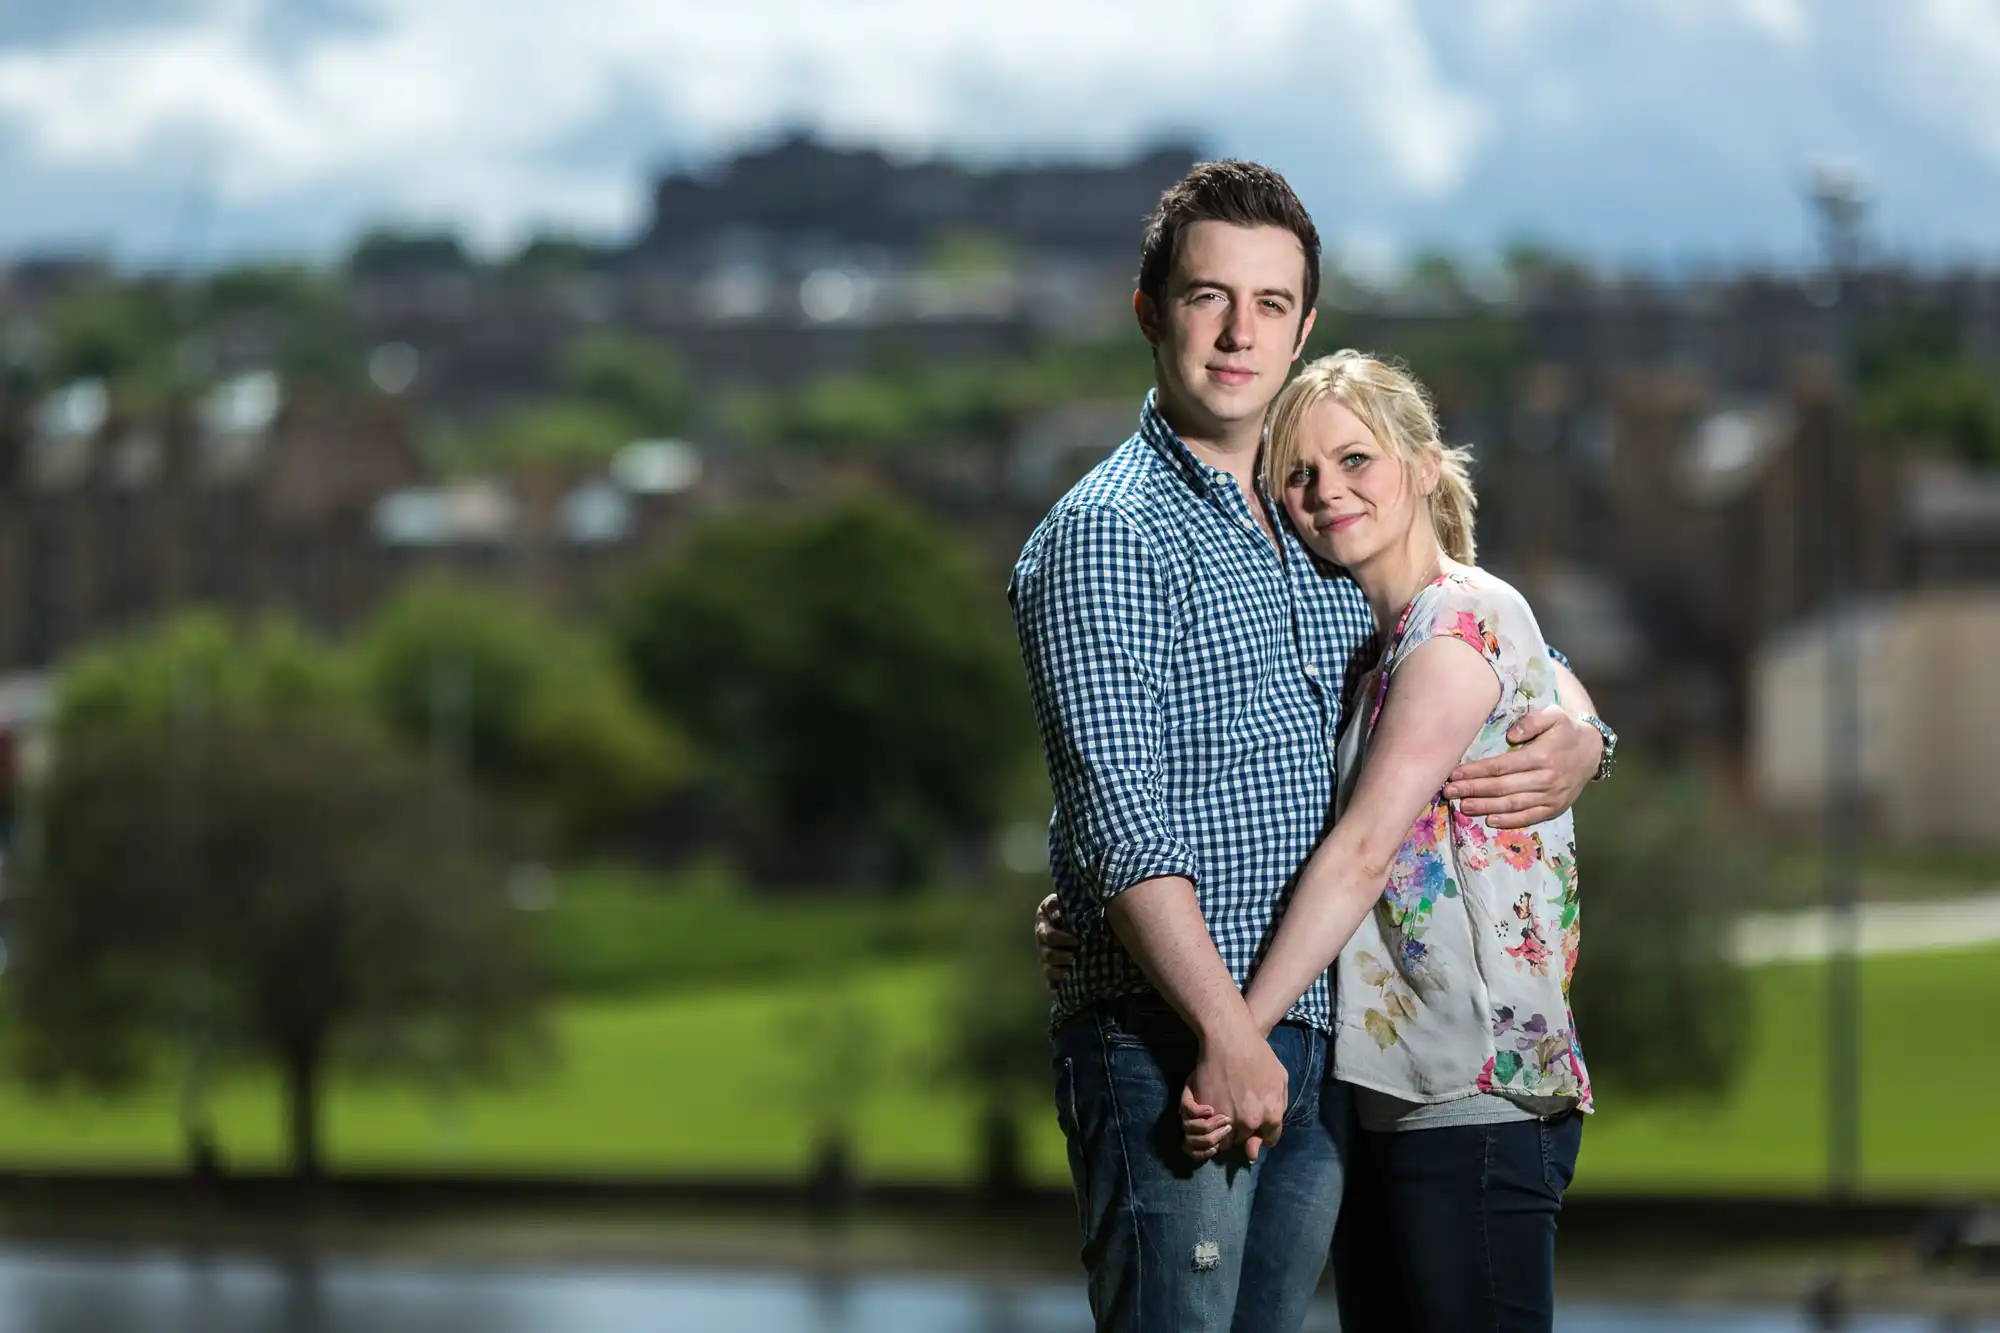 A young couple embracing outdoors with a blurry cityscape and lush greenery in the background.